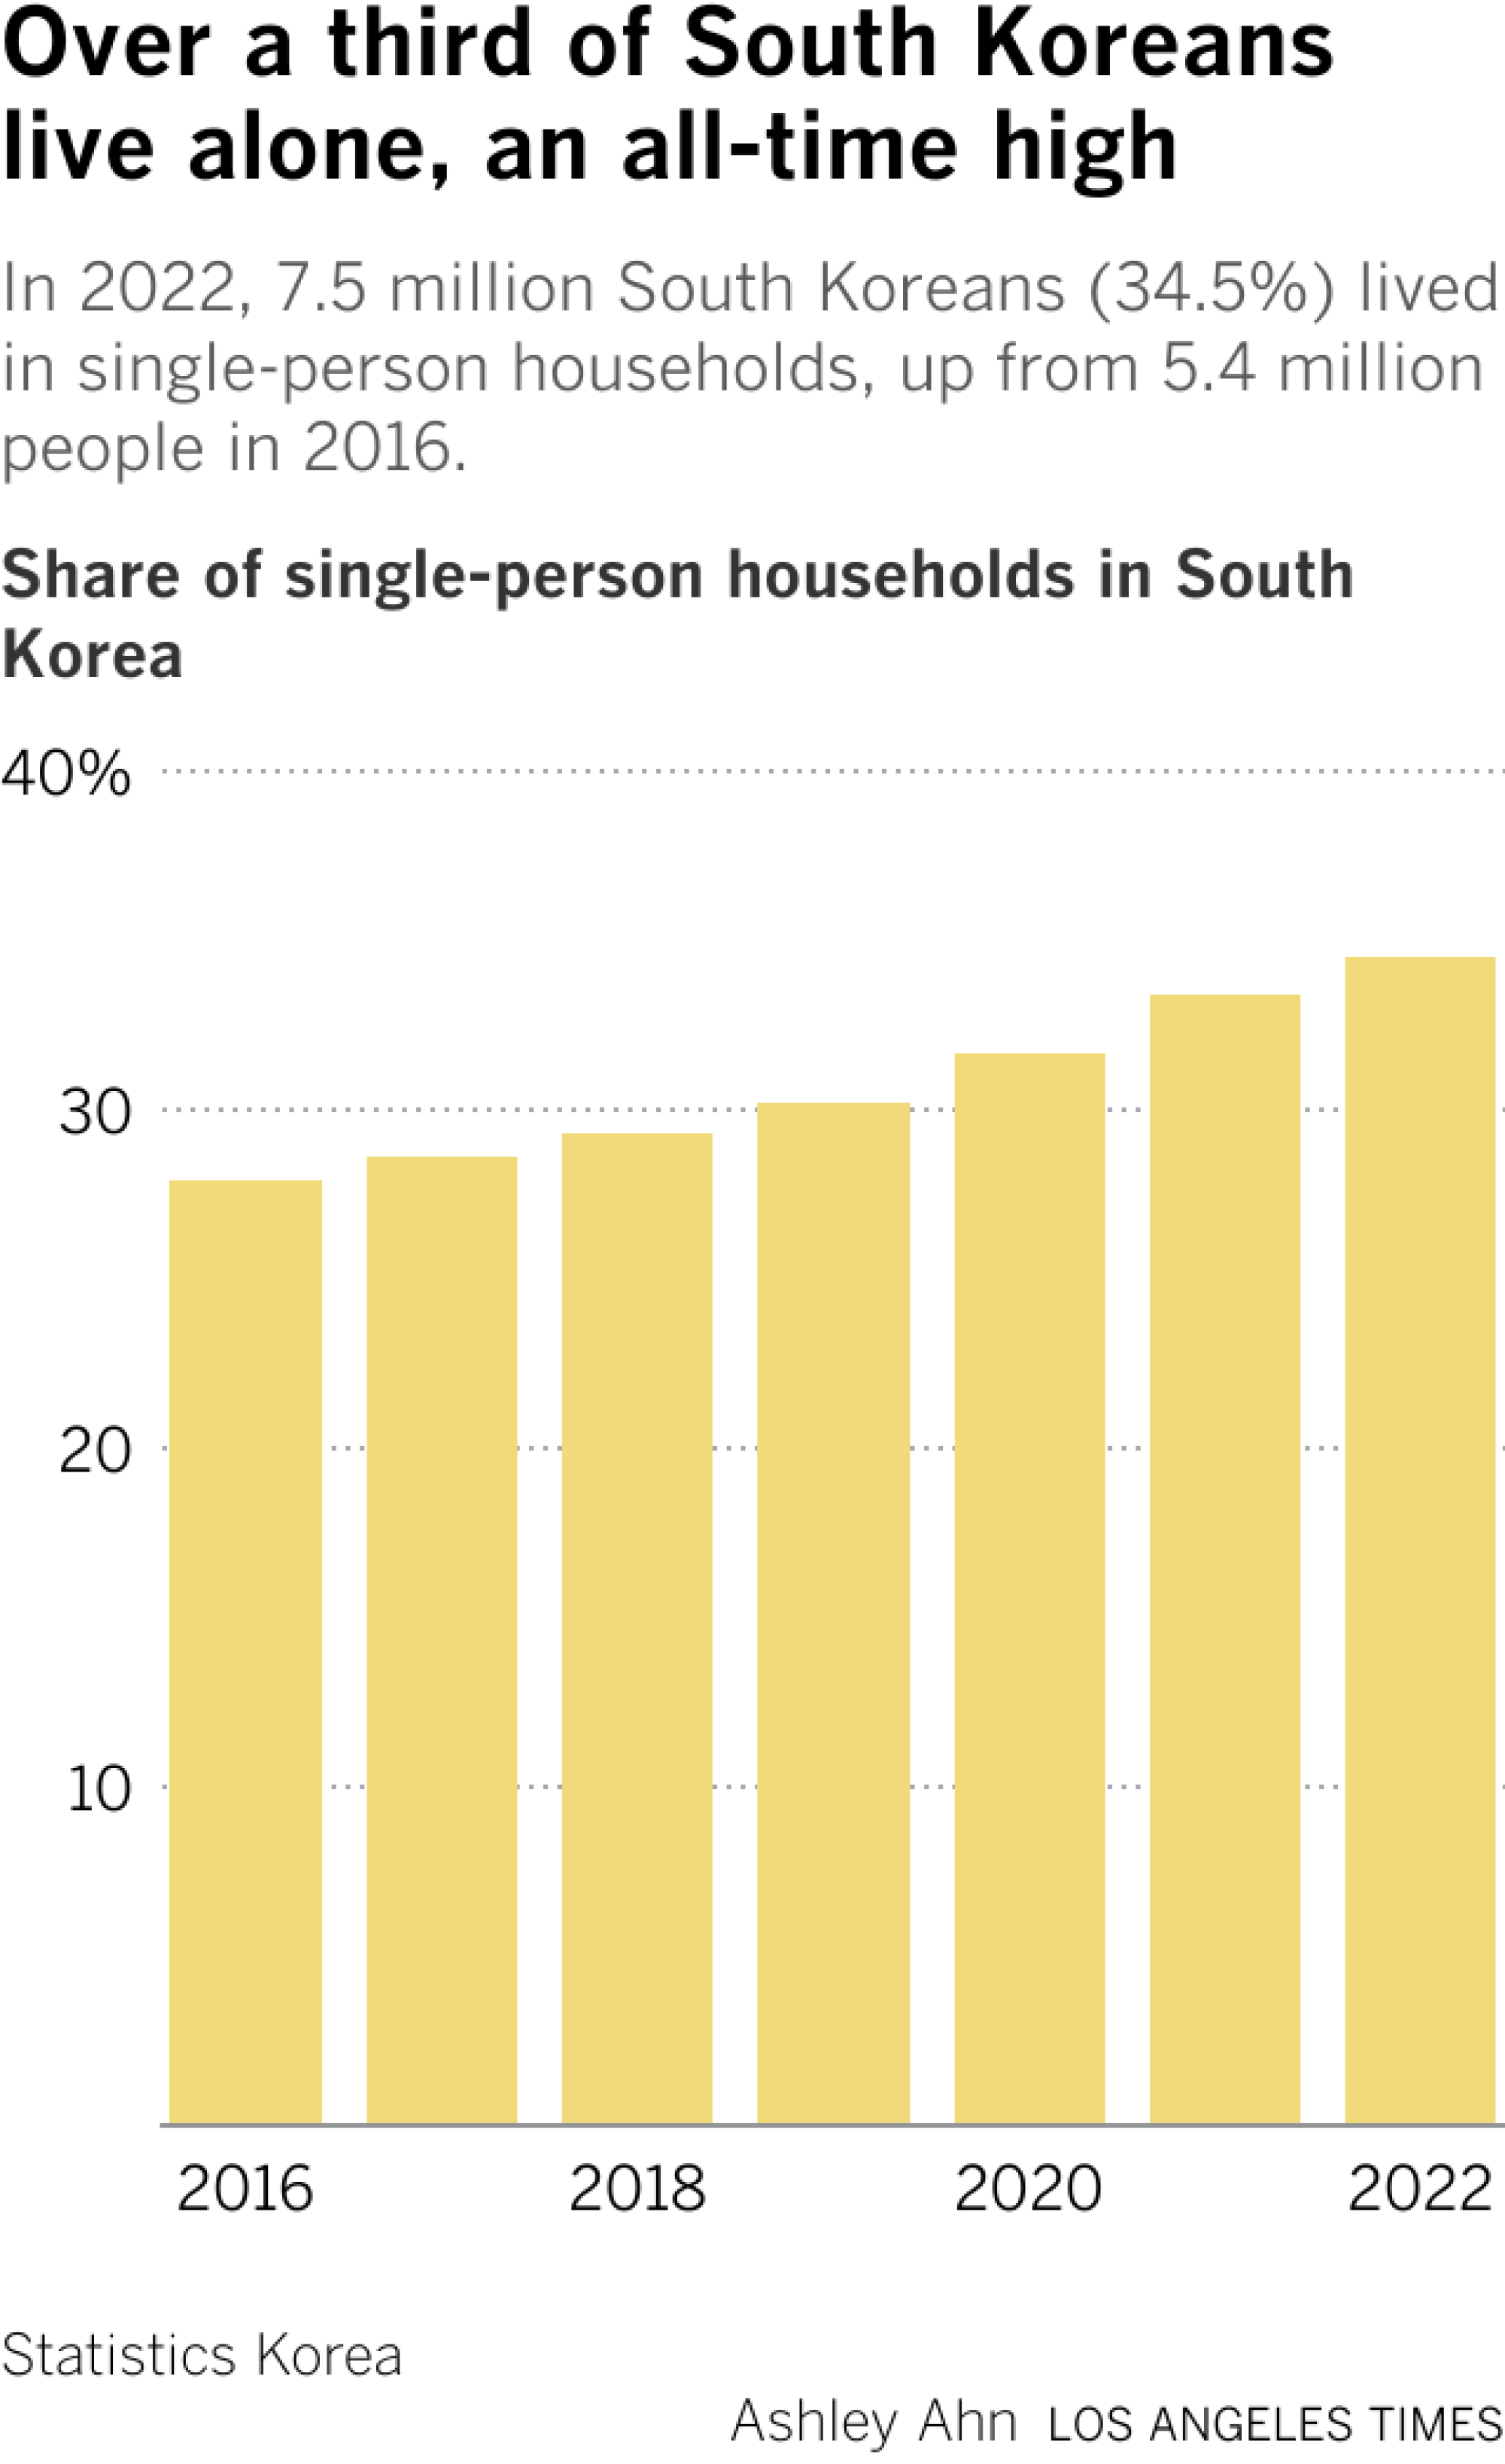 The proportion of single-person households in South Korea increased from 27.9% in 2016, 30.2% in 2019 and 34.5% in 2022.